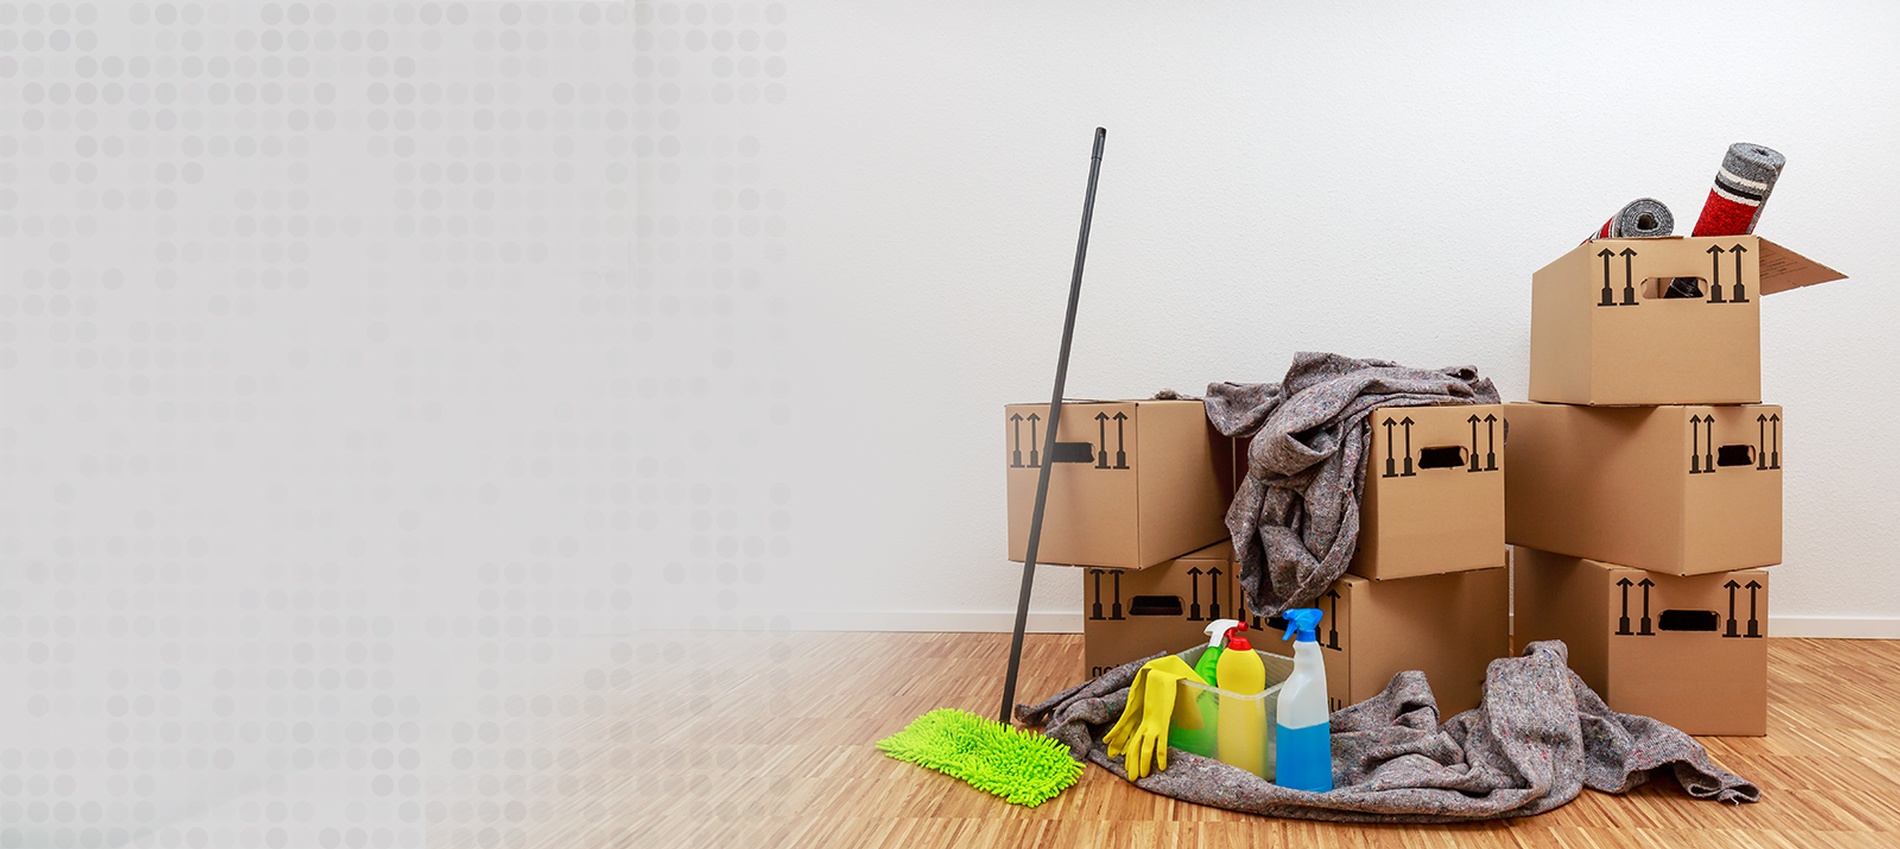 With our Muskegon move-in and move-out cleaning services, you transport your belongings to your new residence